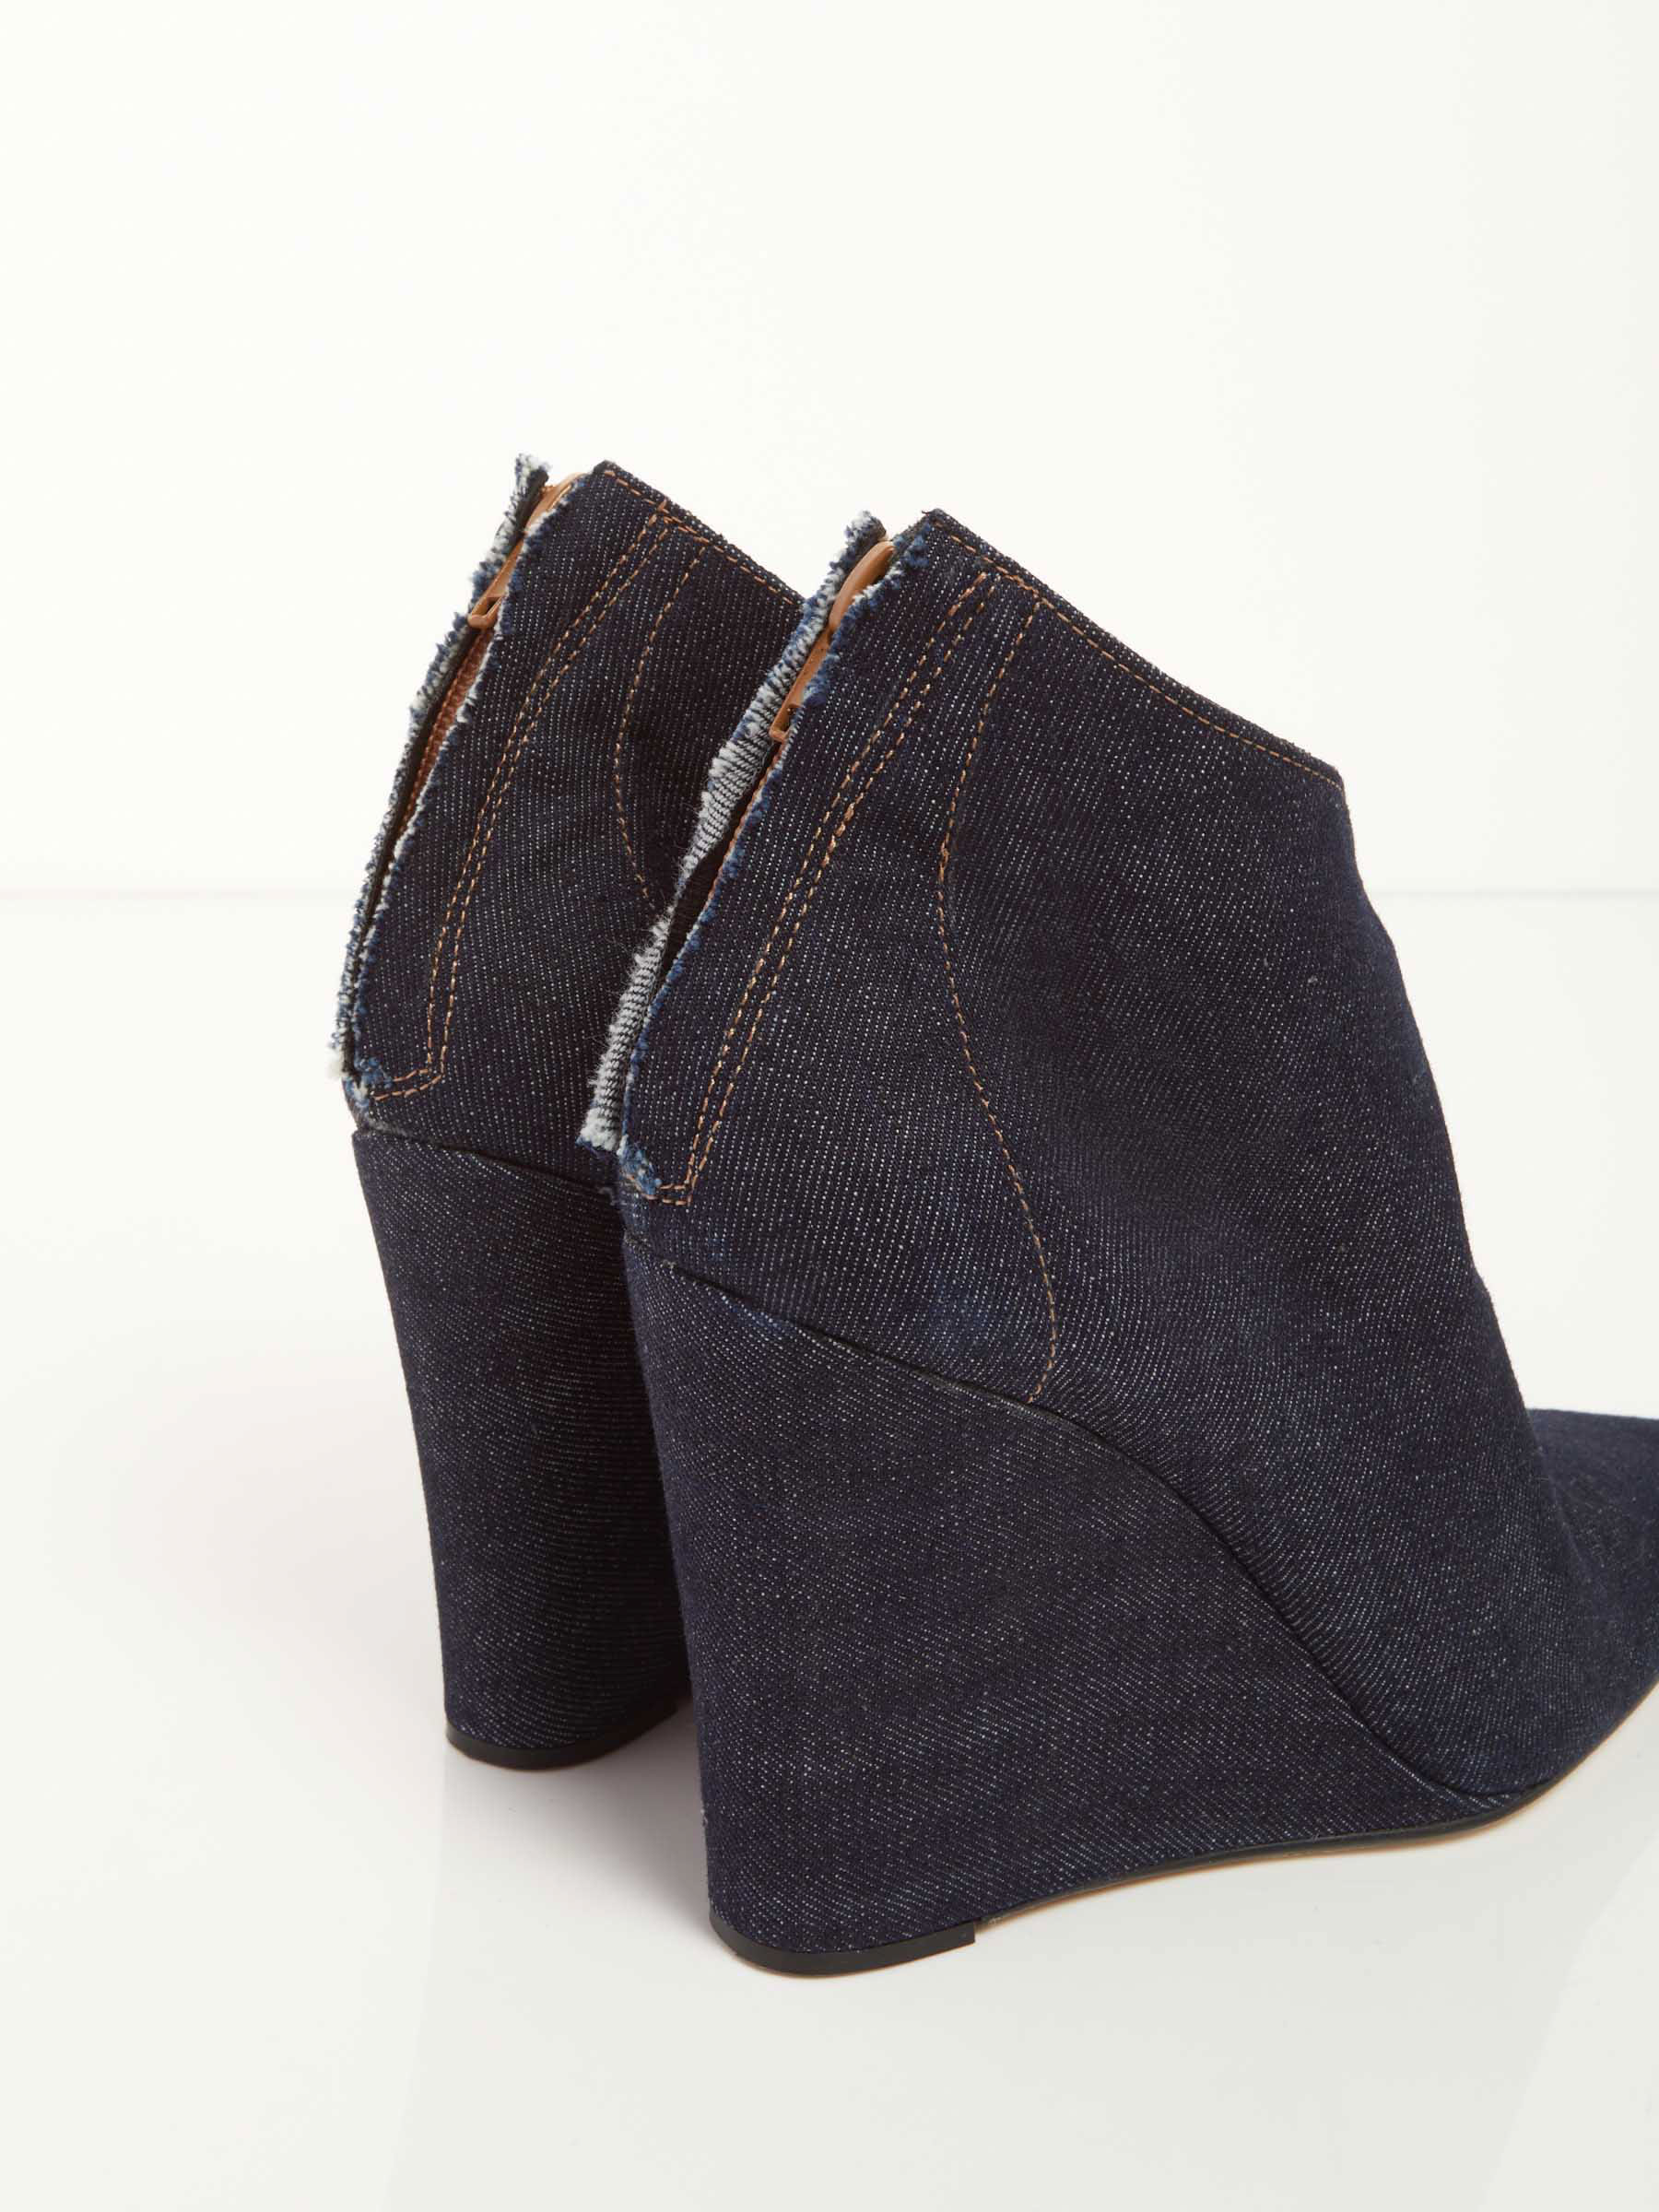 ovye outlet Wedge Jeans Ankle Boots F0545554-0471